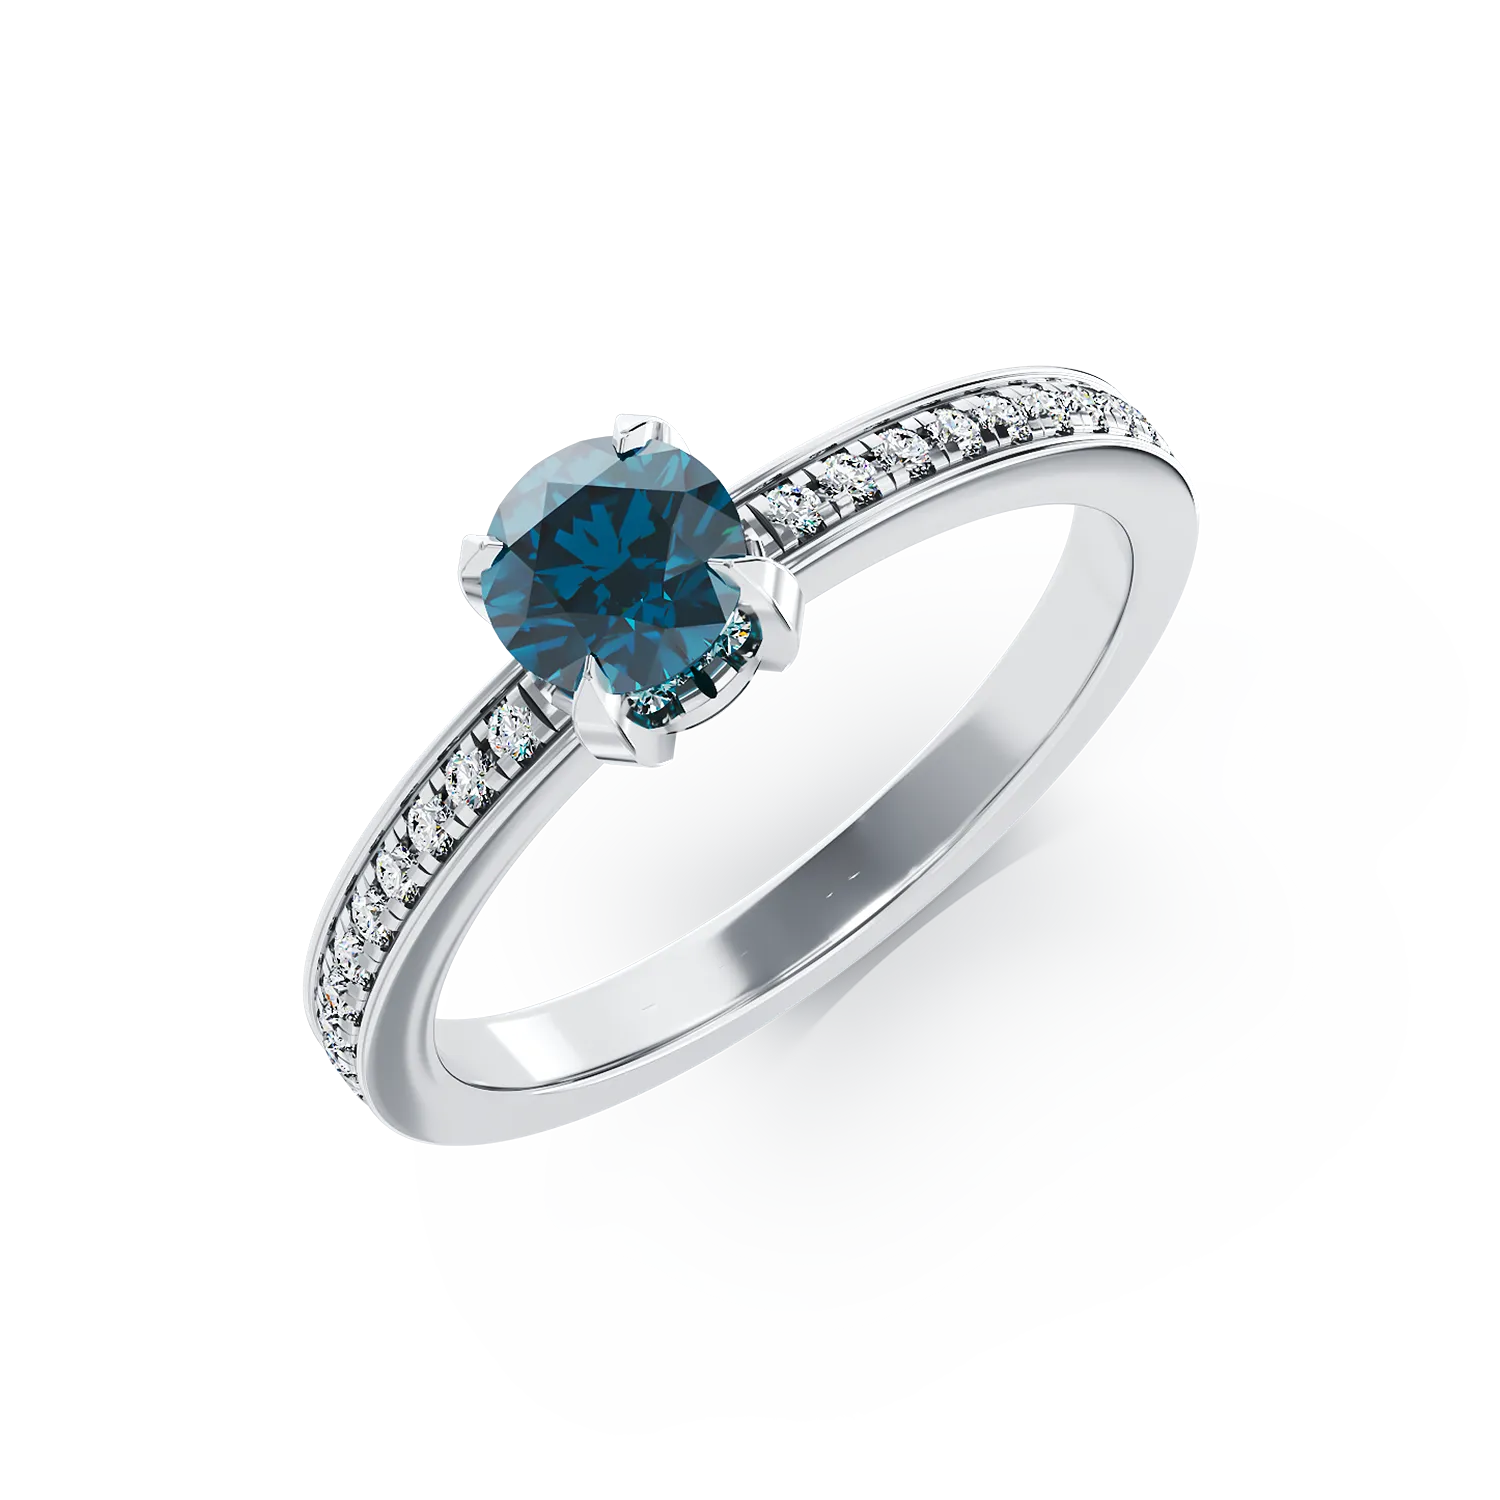 18K white gold engagement ring with 0.41ct blue diamond and 0.2ct transparent diamonds